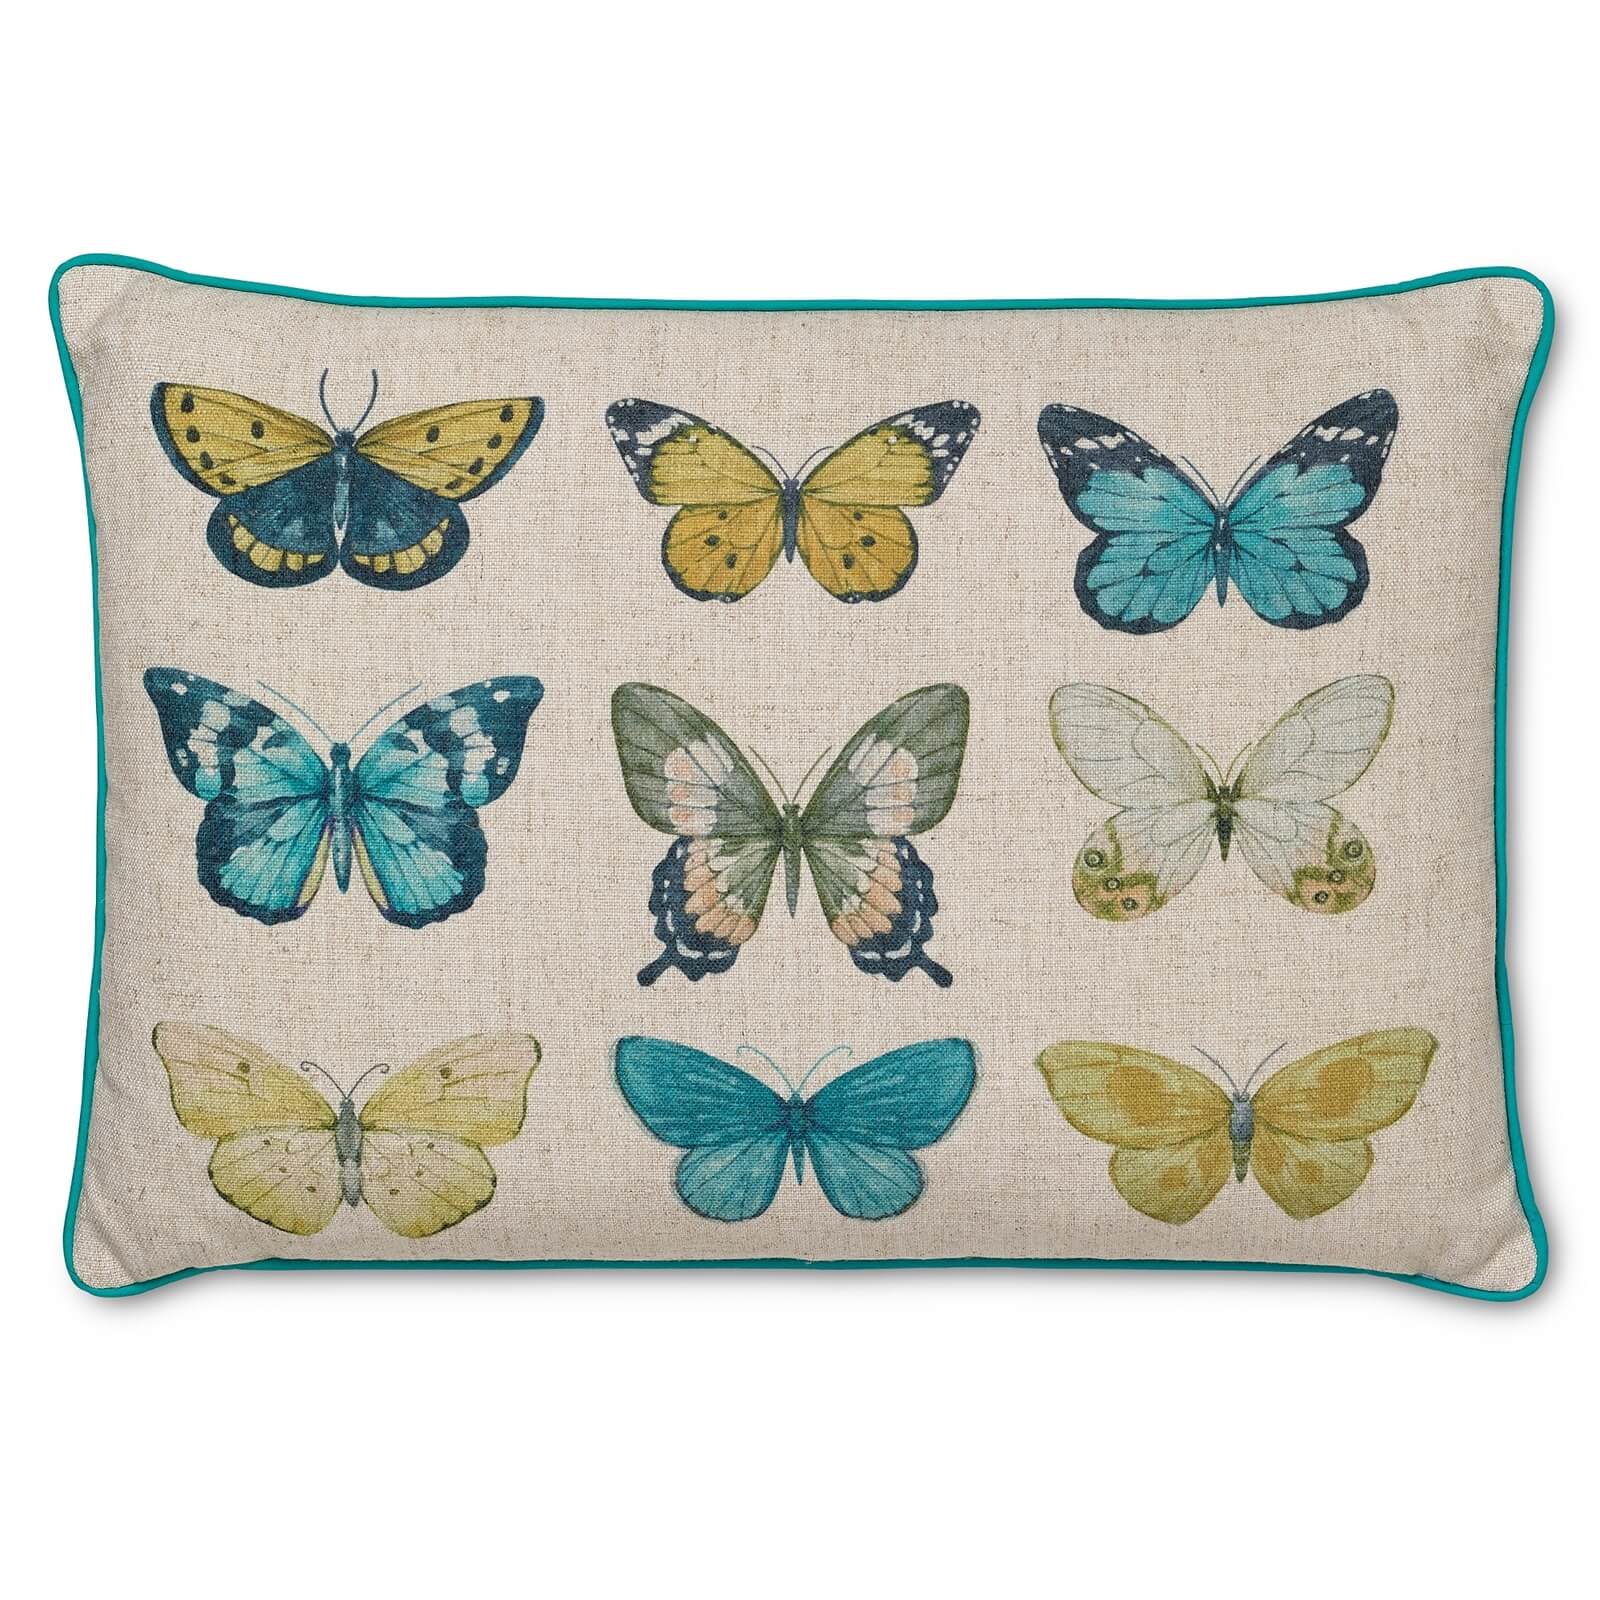 Printed Butterfly Cushion - Teal